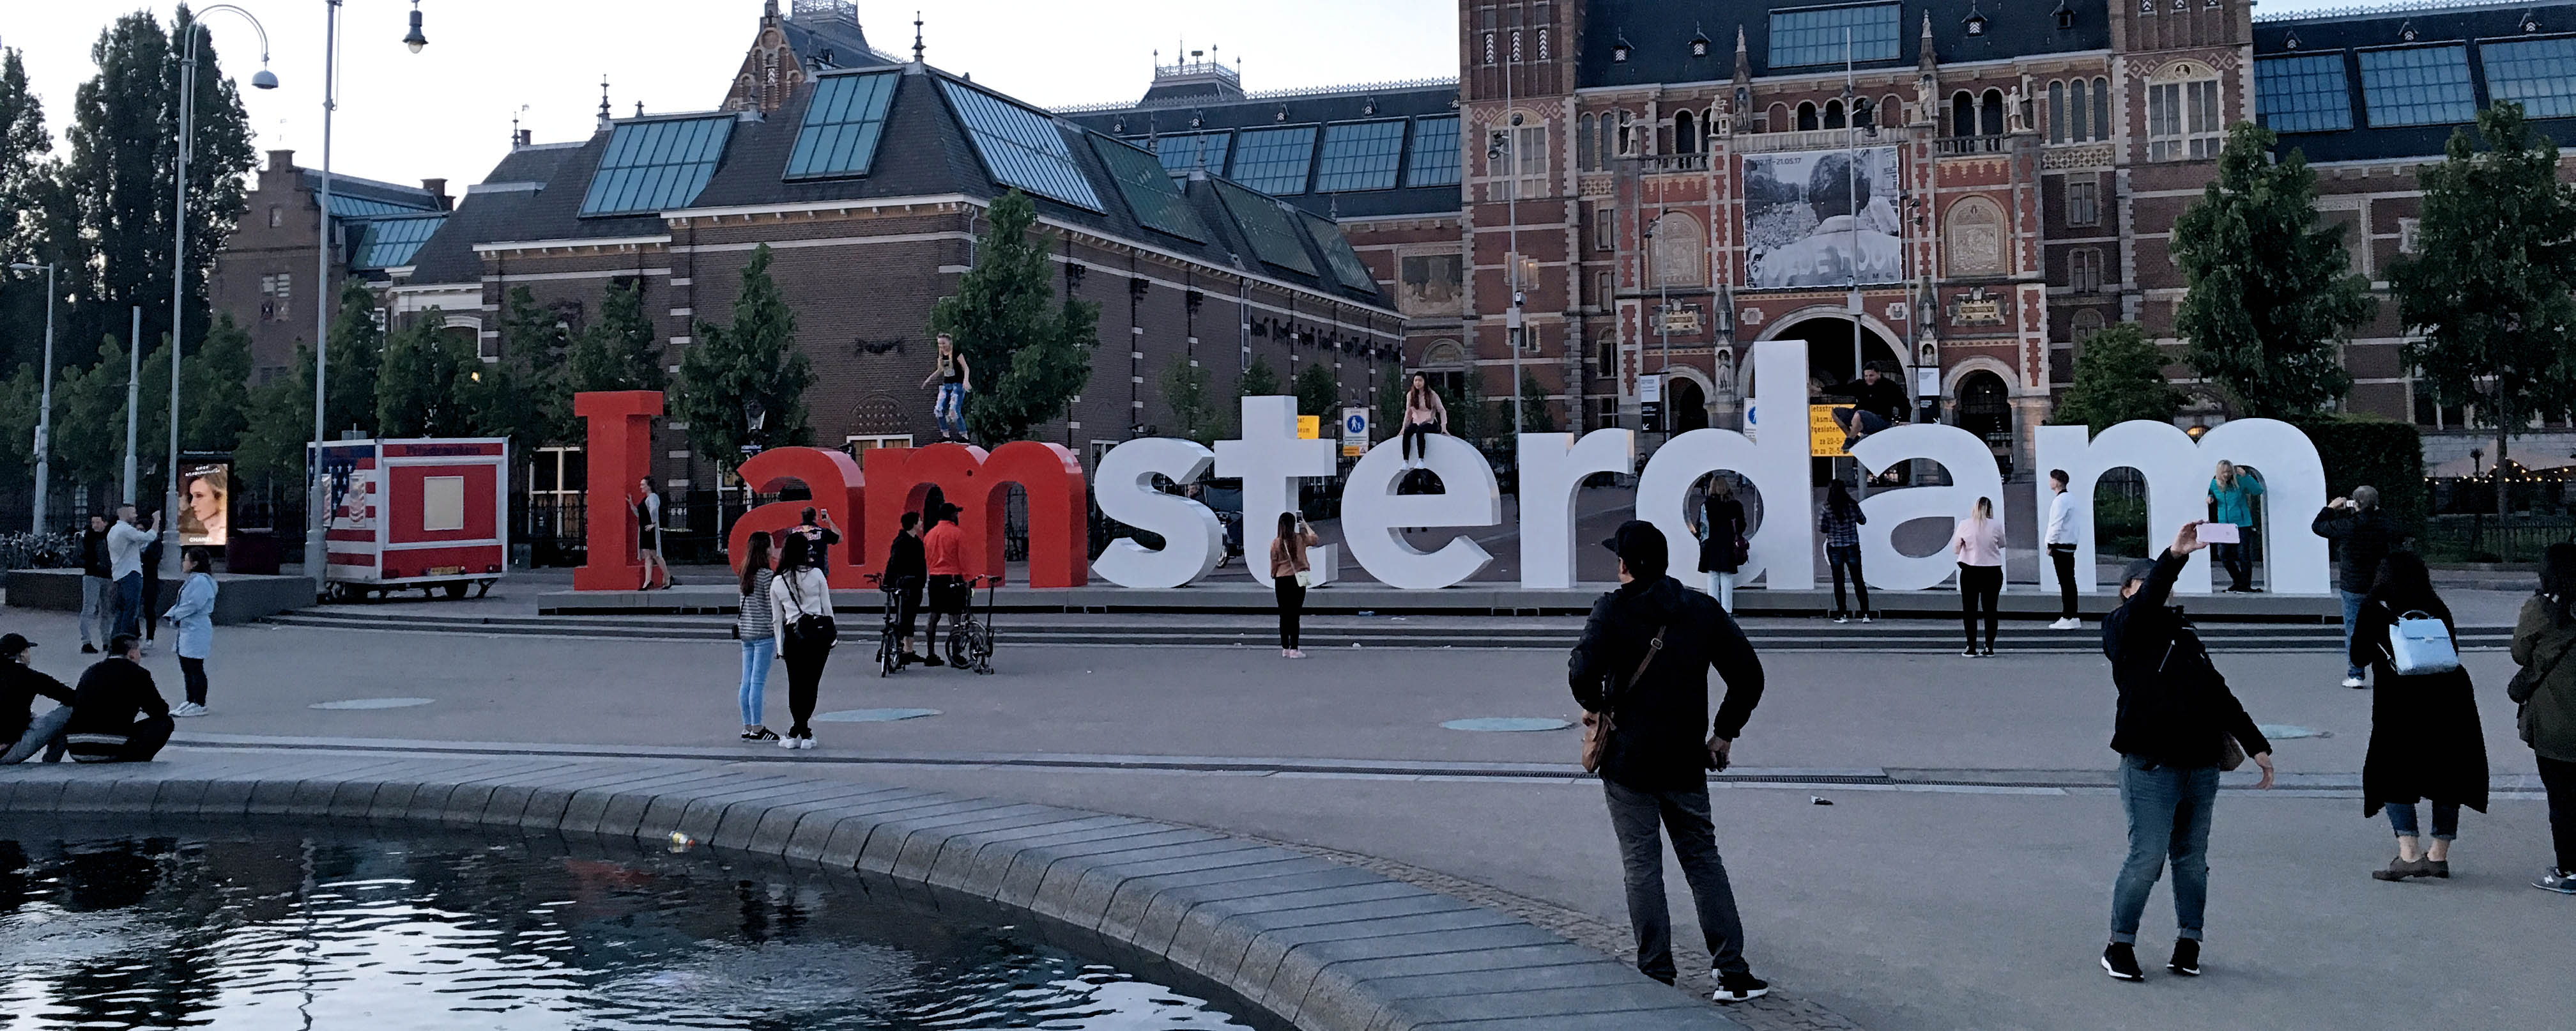 People taking pictures around and on top of 'I amsterdam' sign in Museumplein, The Netherlands